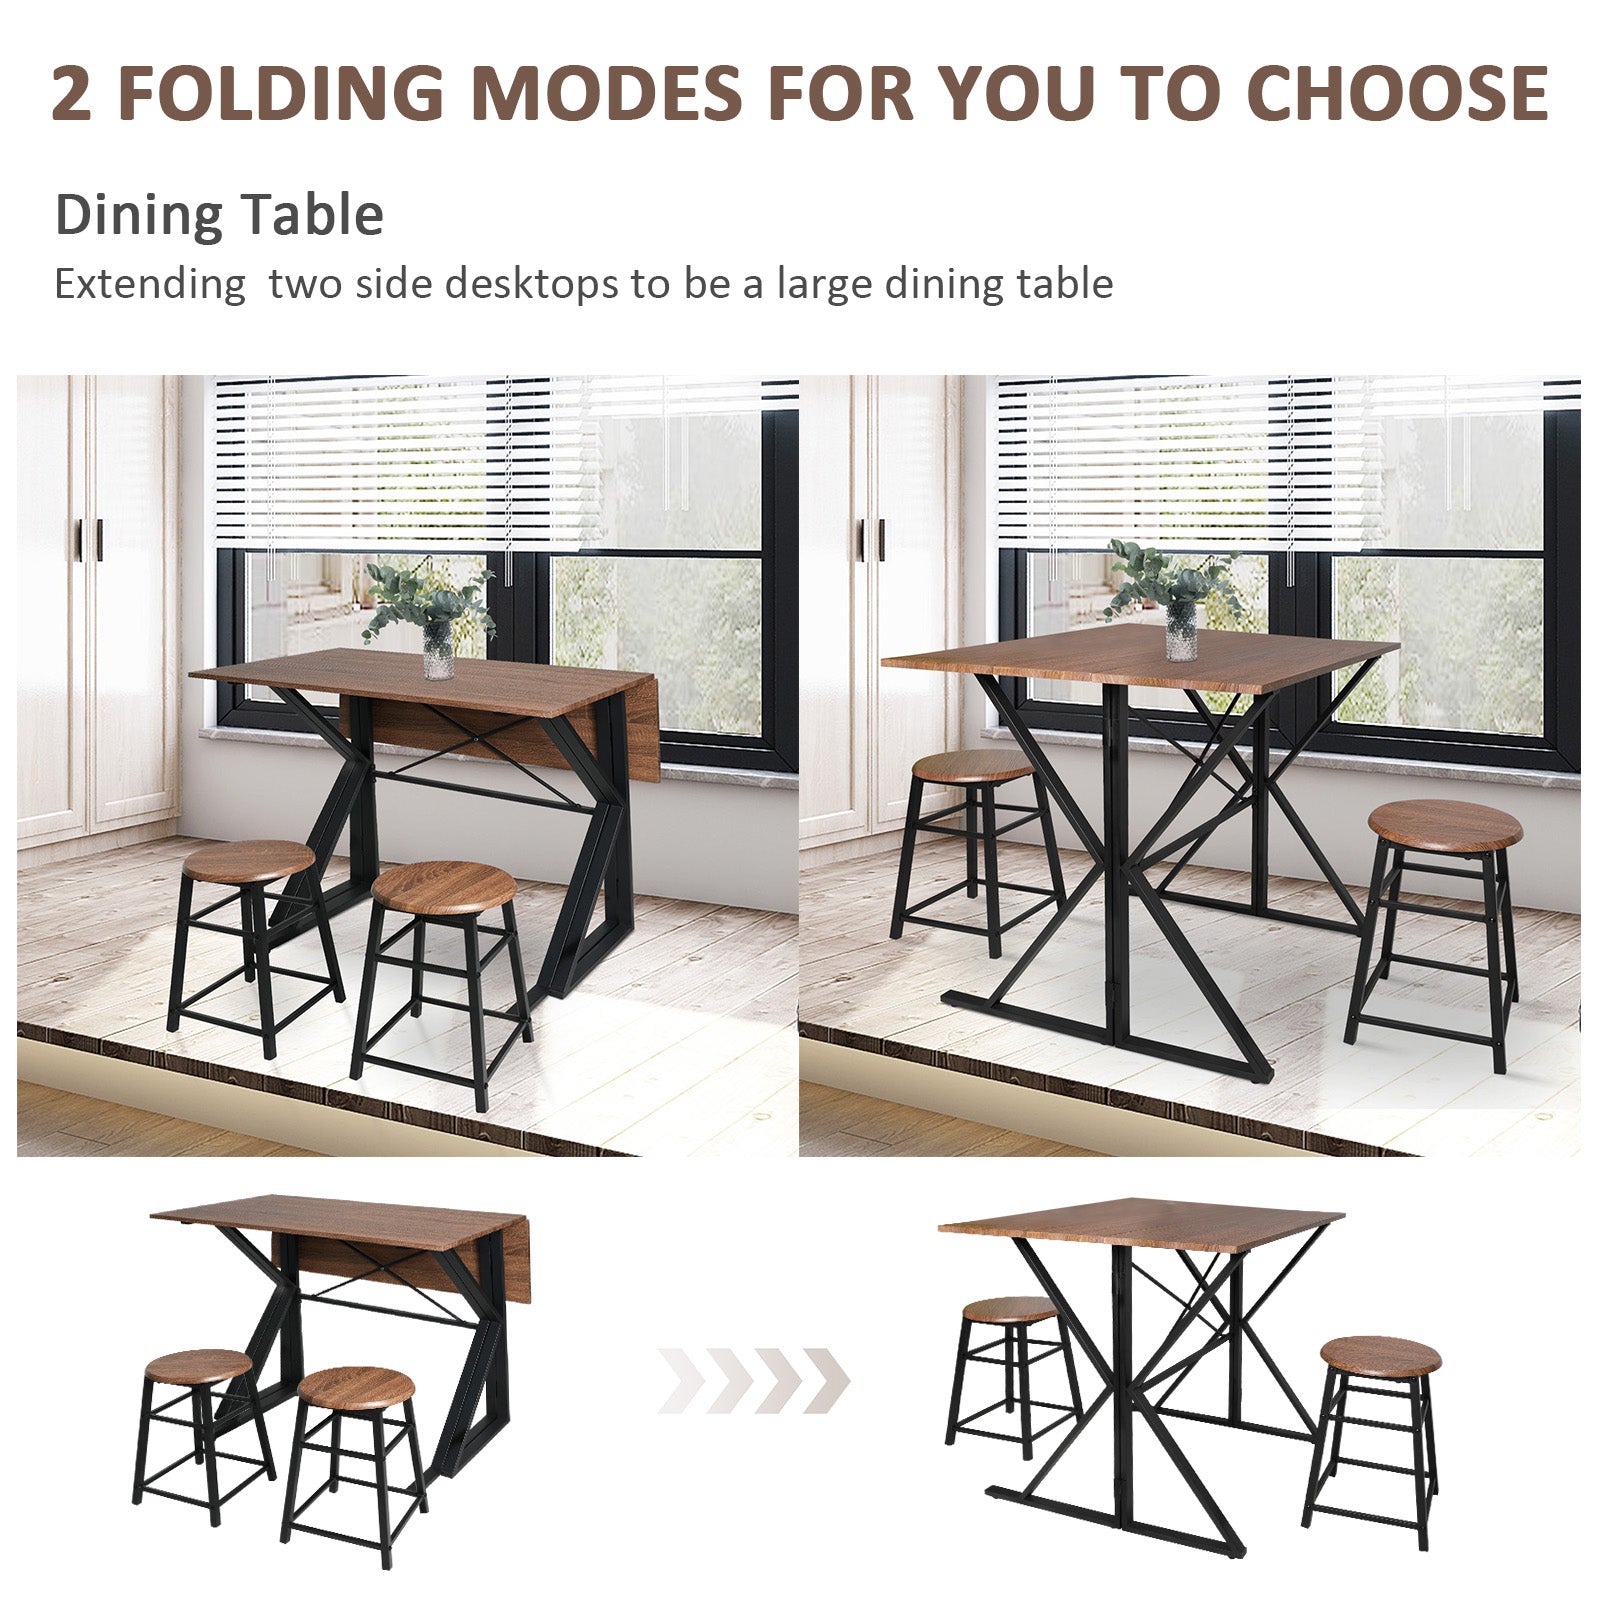 Drop Leaf Dining Table Set for Small Space, 35.4" Drop Leaf Table with 2 Stools